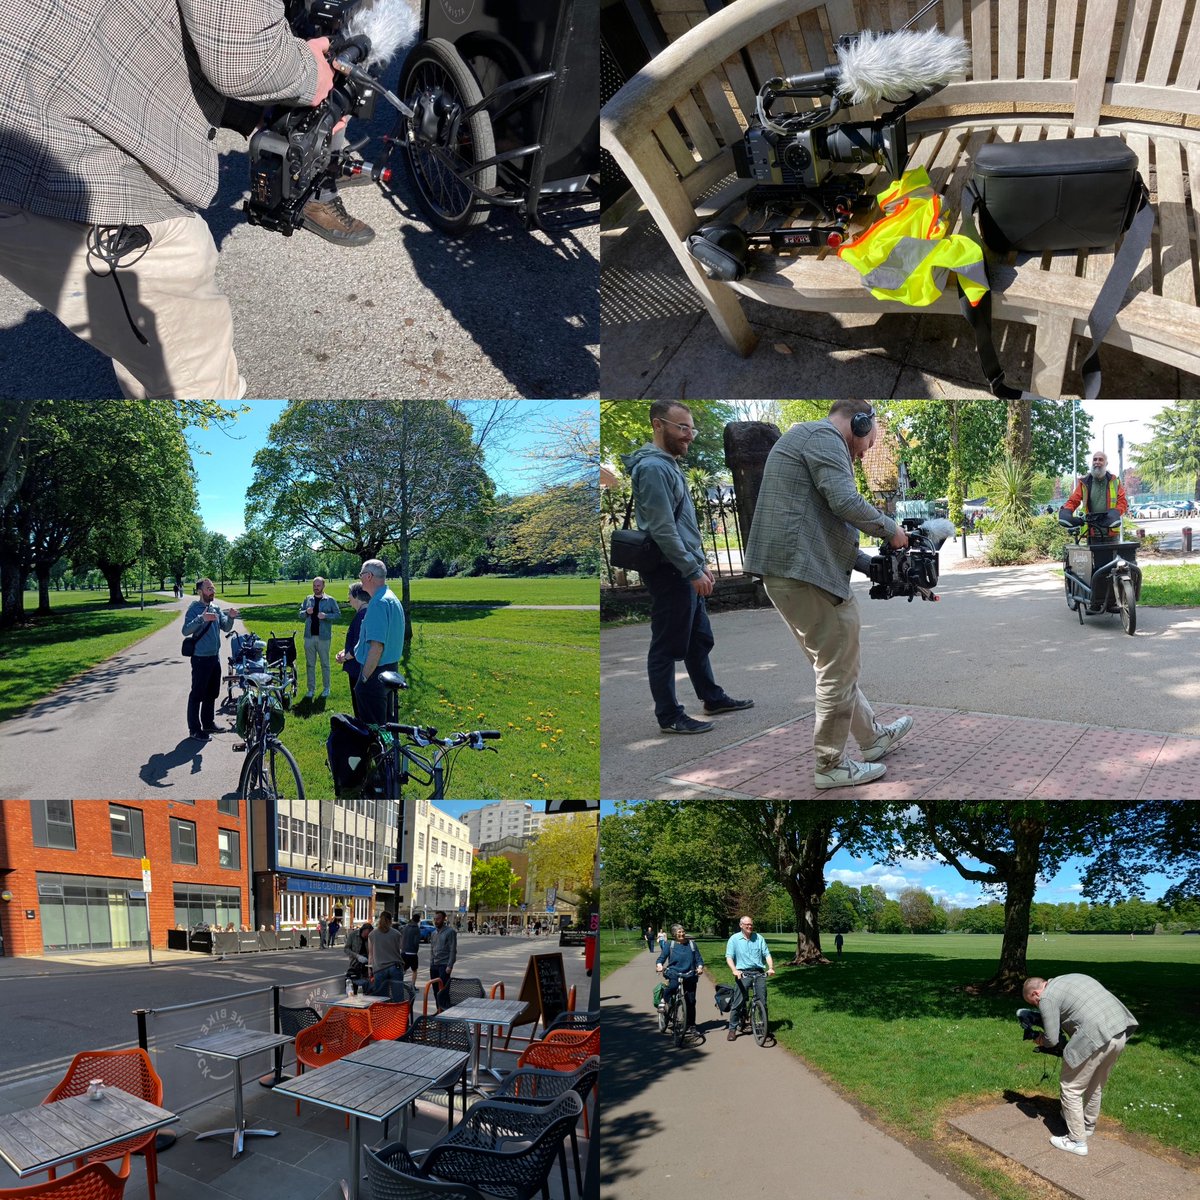 What's occurrin' ? The weather's perfect to get out and about on bikes. #Cardiff #Cycle City are working on an exciting new project which has taken us all over the city meeting people who are passionate about #cycling in their everyday lives. Stay tuned for more info! 🛴🚲🎥🕵️‍♀️